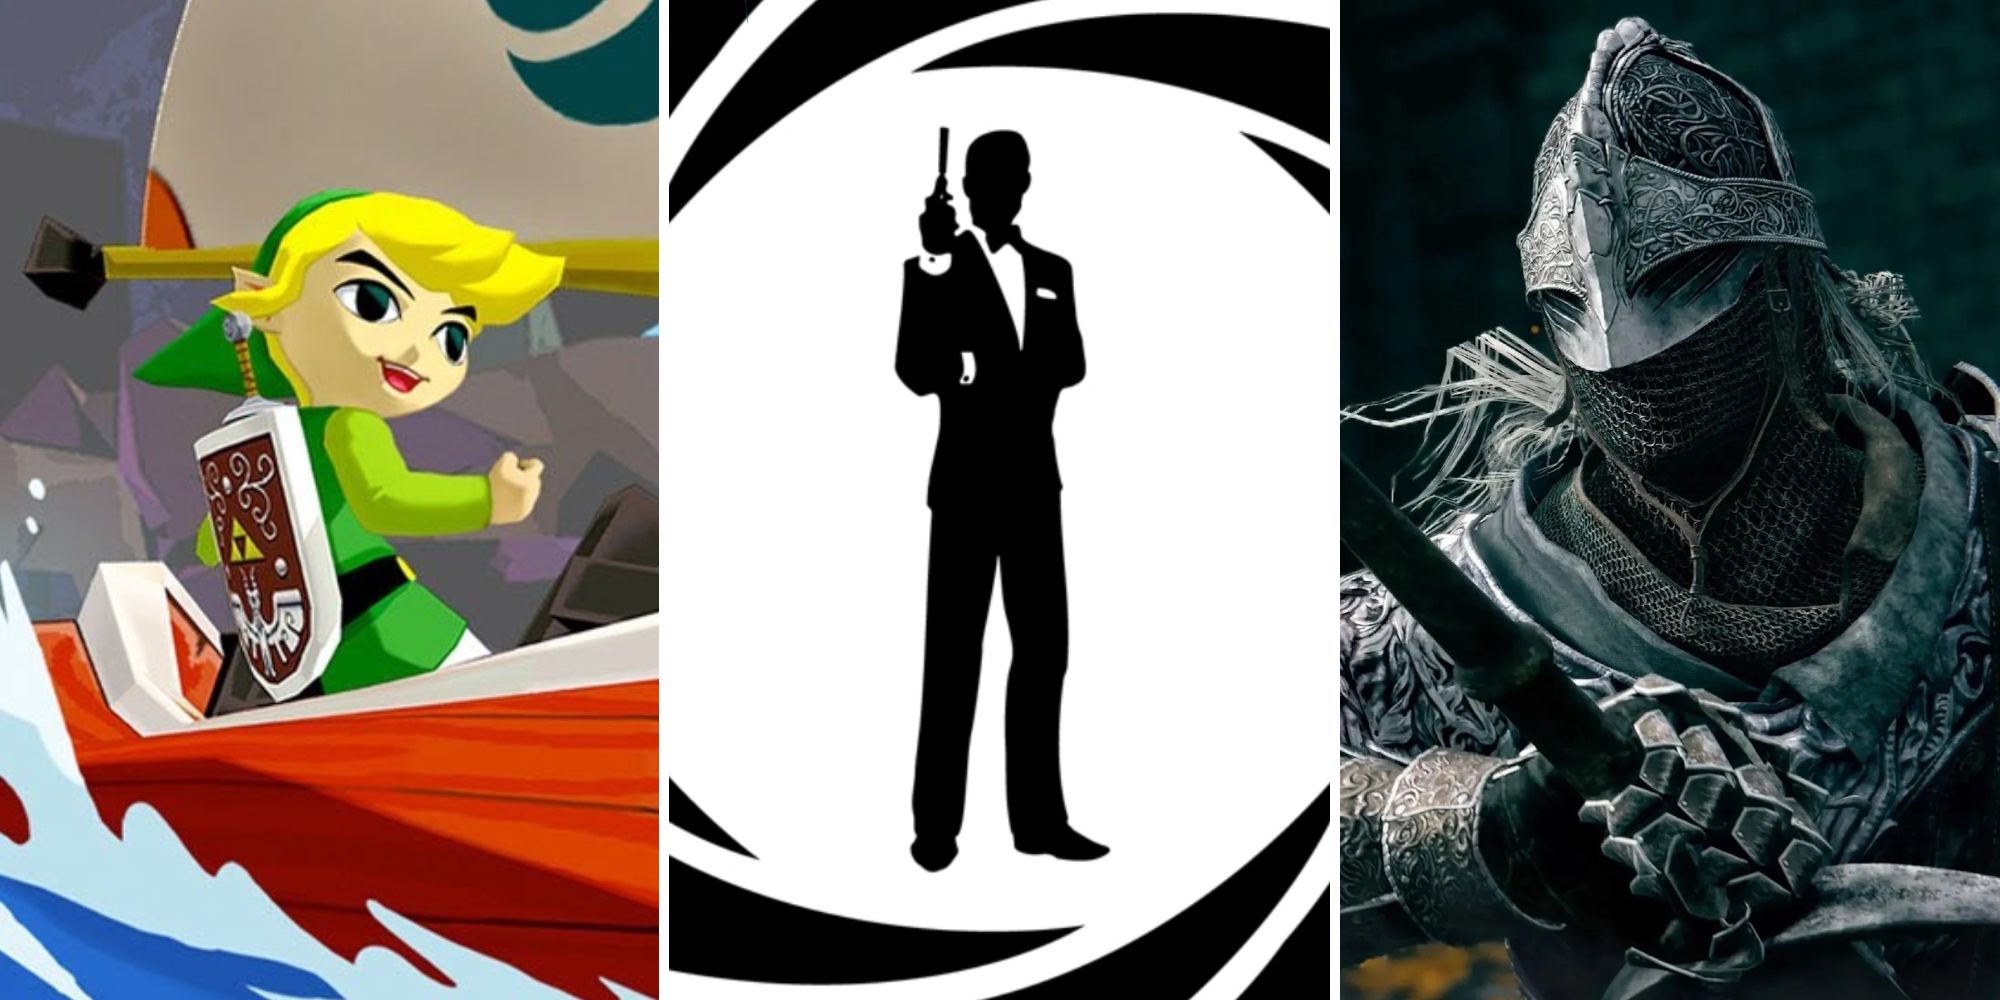 Link from Wind Waker, James Bond down the barrel of a gun, and a knight from Elden Ring